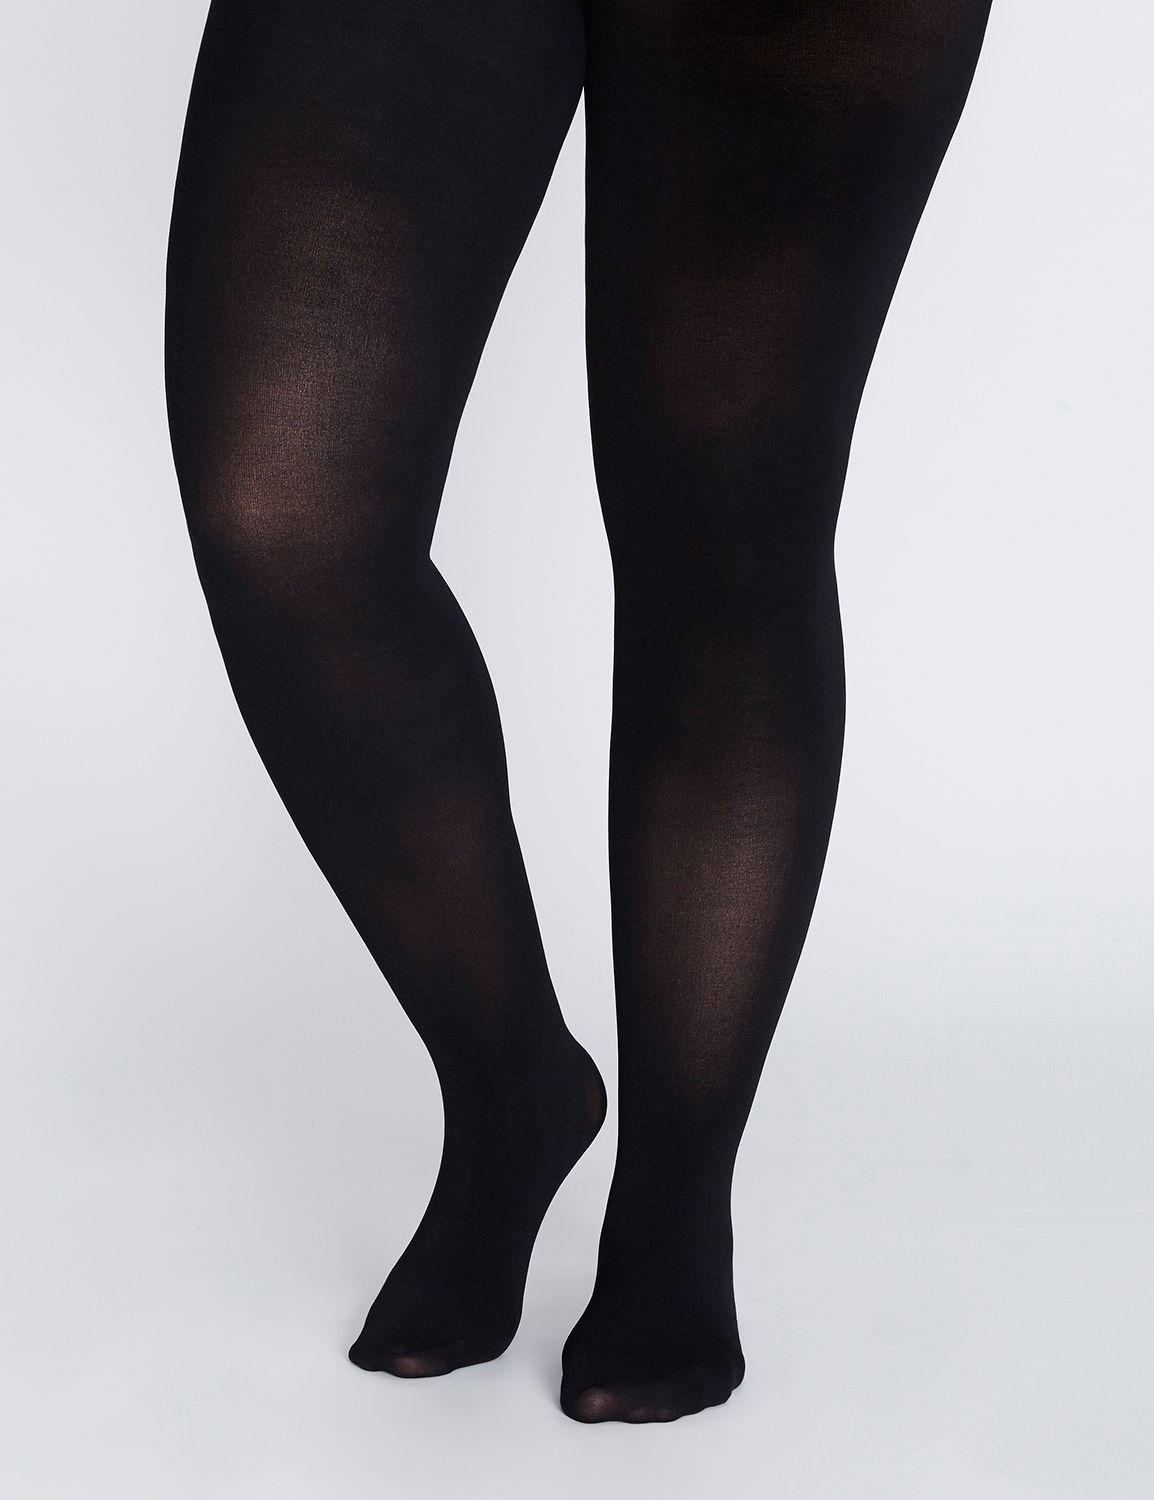 Shop for Super Opaque Tights